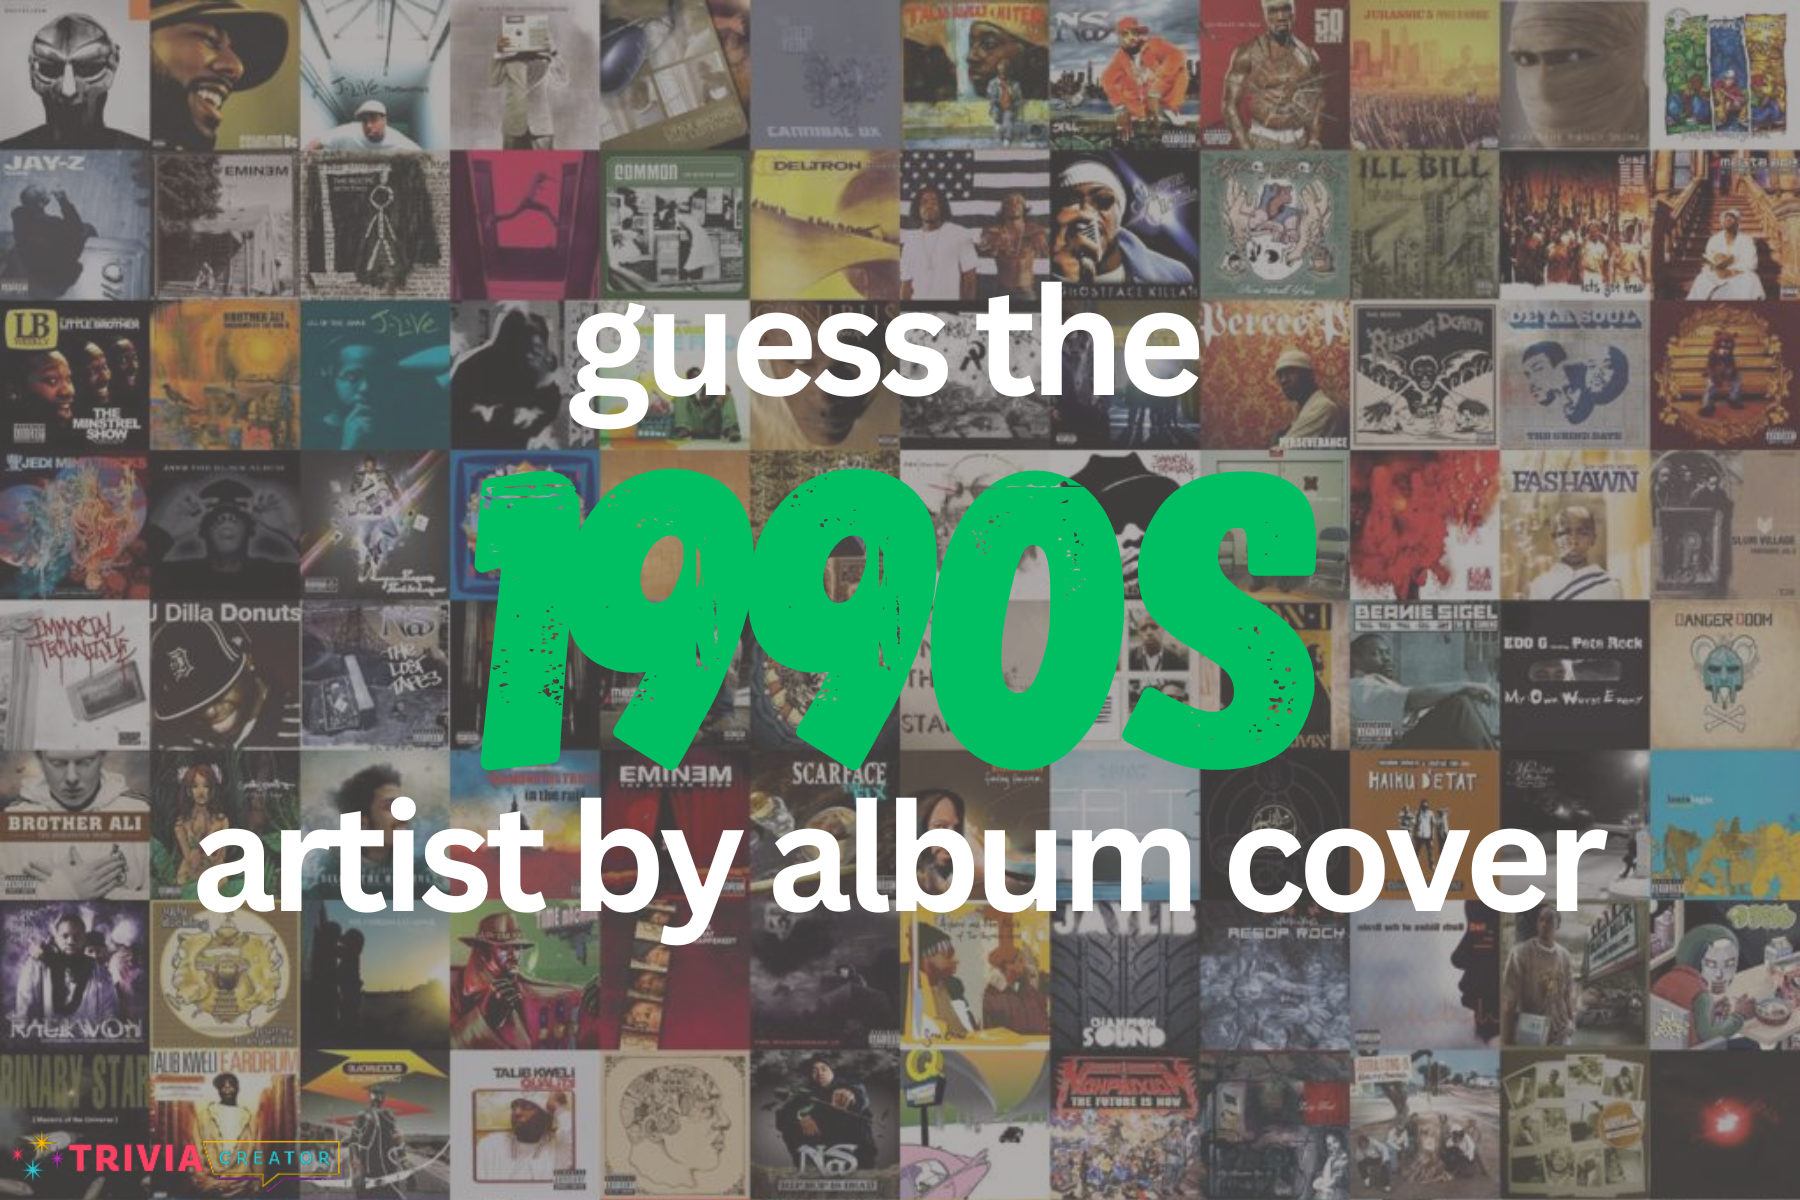 Can You Guess the Artist by Their Best-Selling Album of the 1990s?